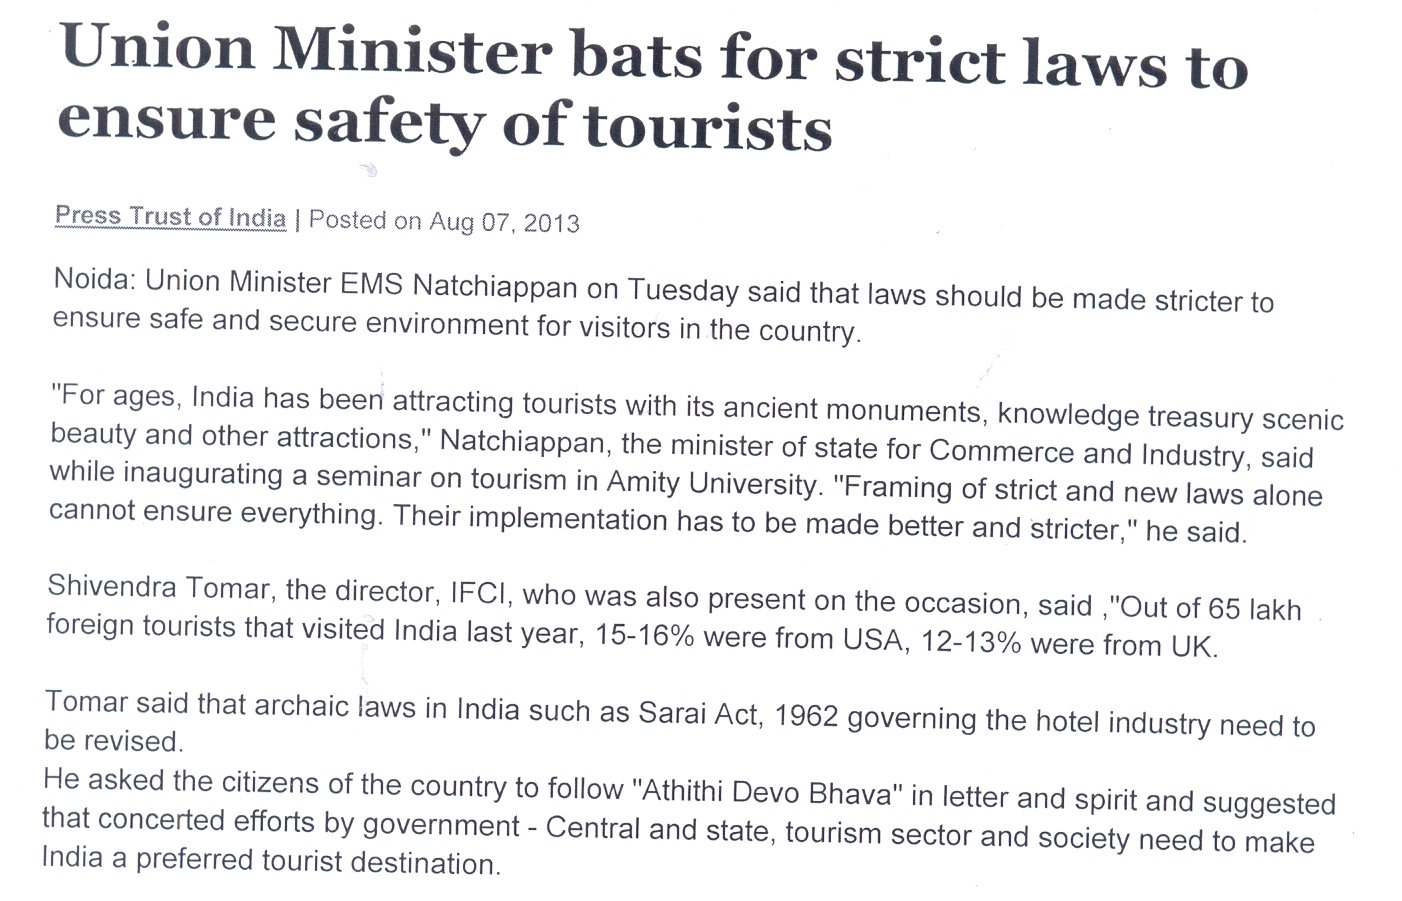 Union Minister Natchiappan bats for stricter laws to ensure tourists safety during seminar at Amity